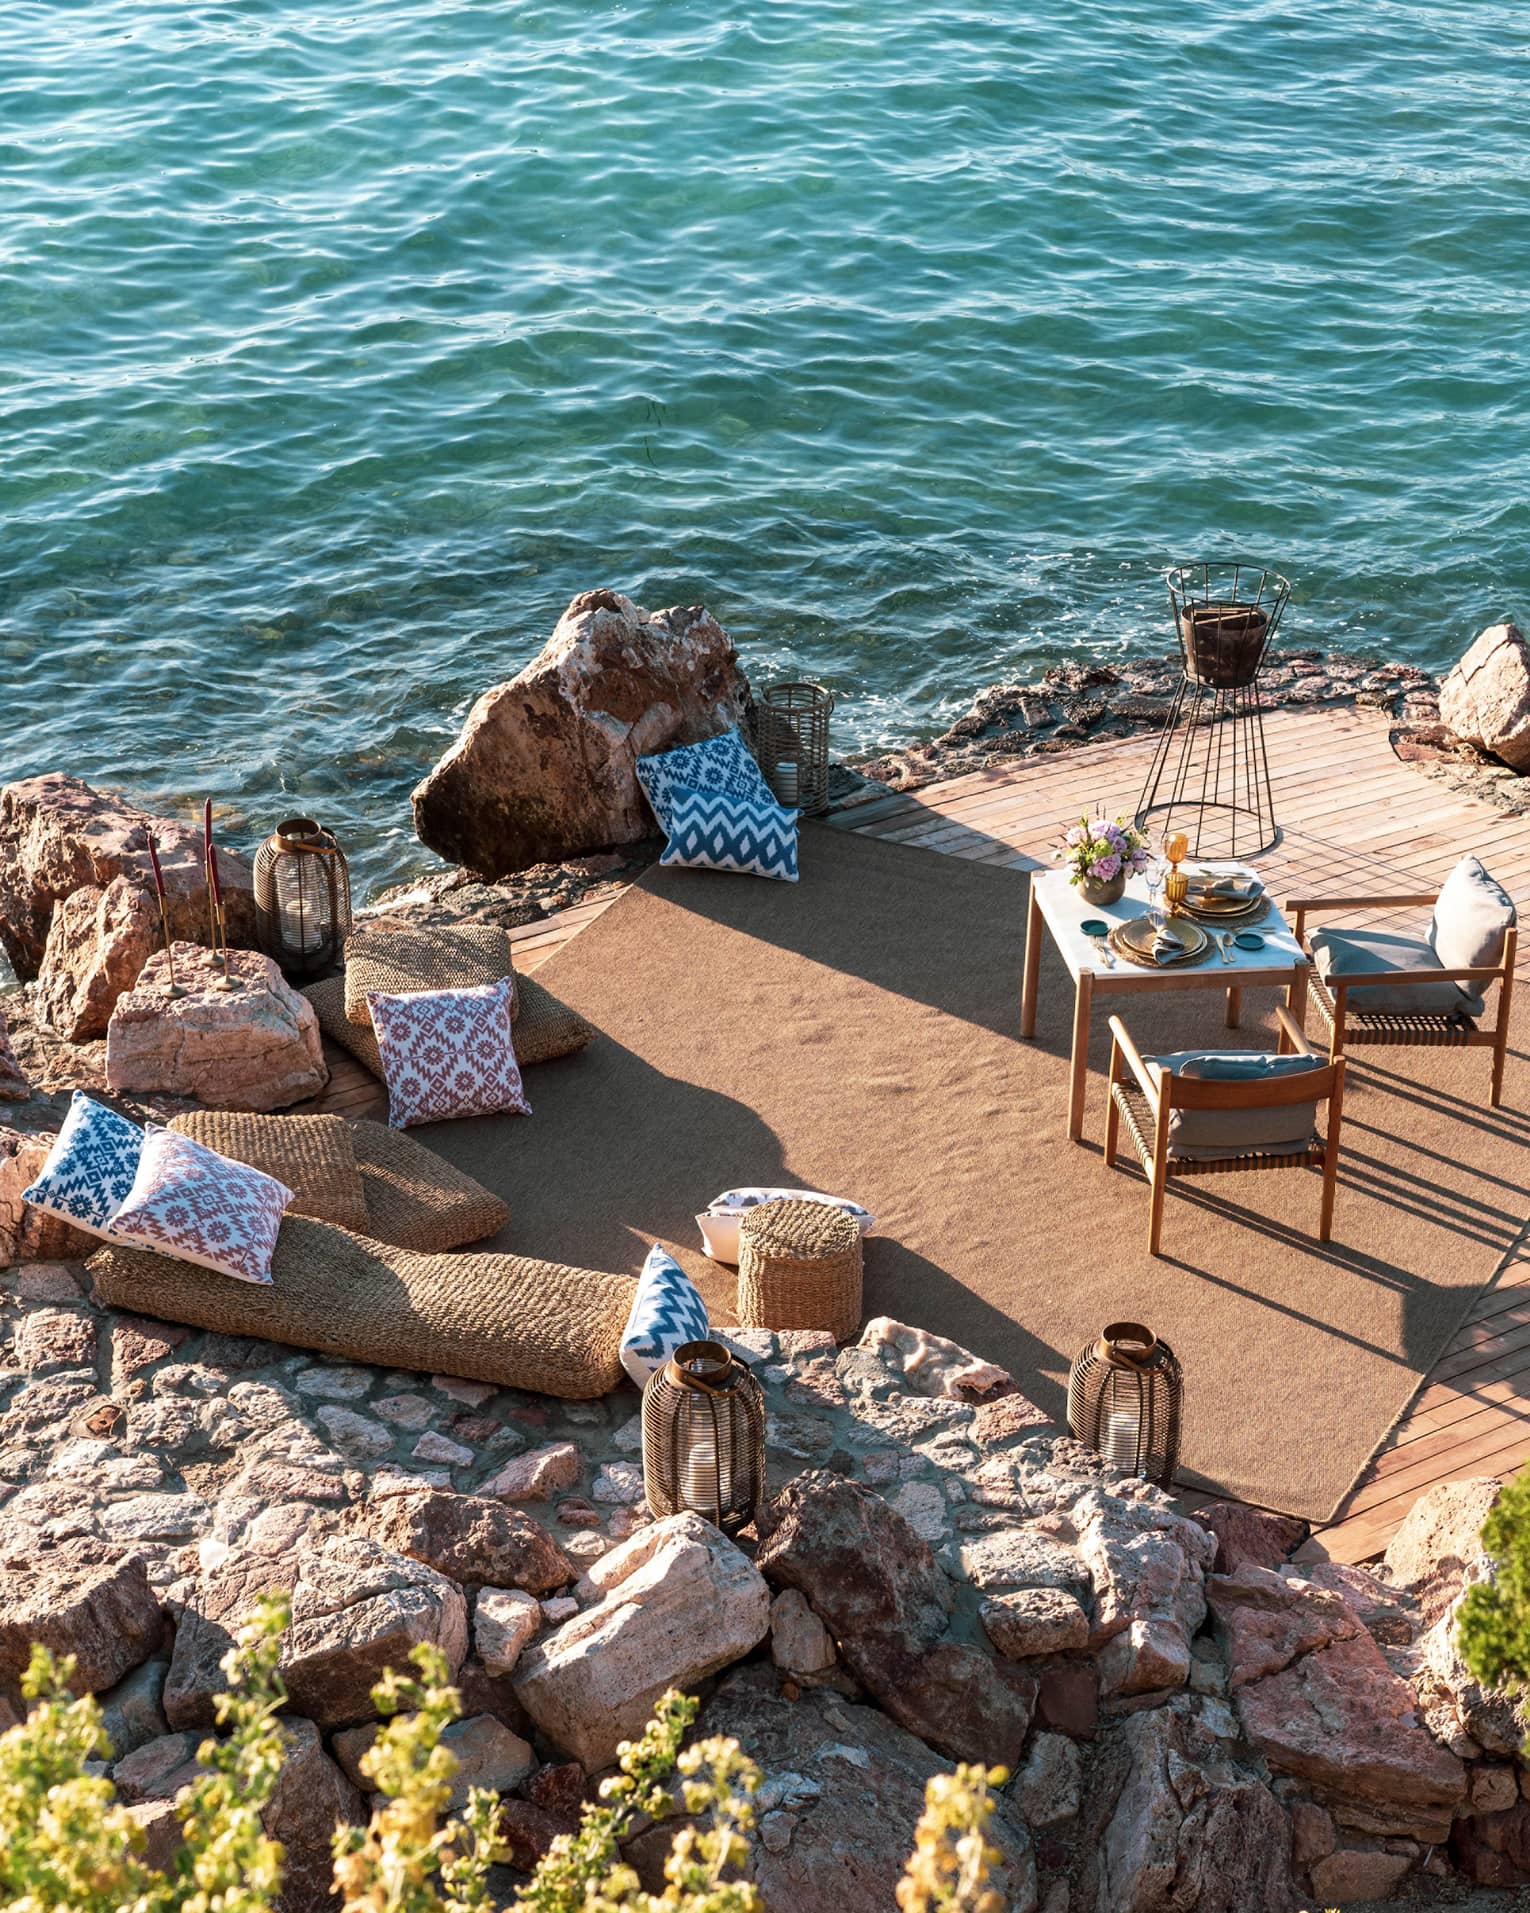 A dining table with two chairs is set on a private rocky peninsula next to the sea